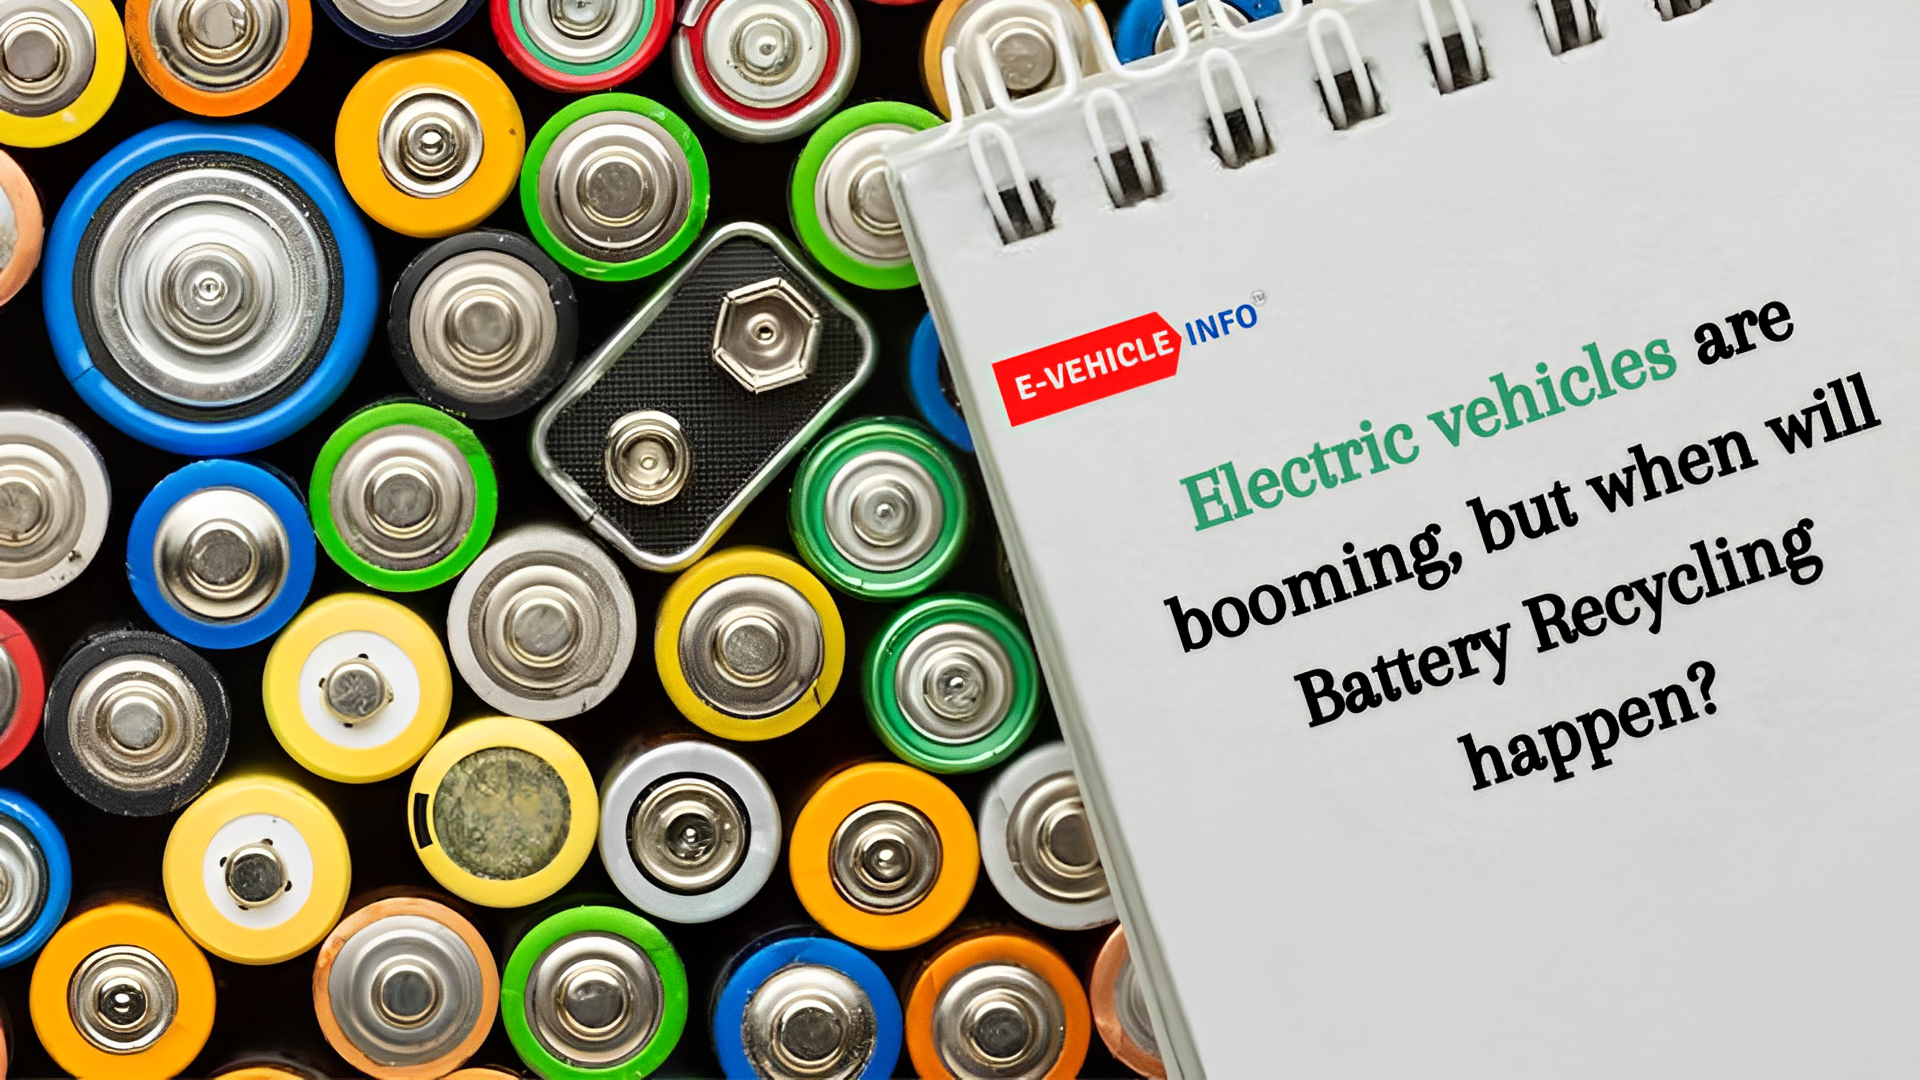 Electric vehicles are booming, but when will Battery Recycling happen?